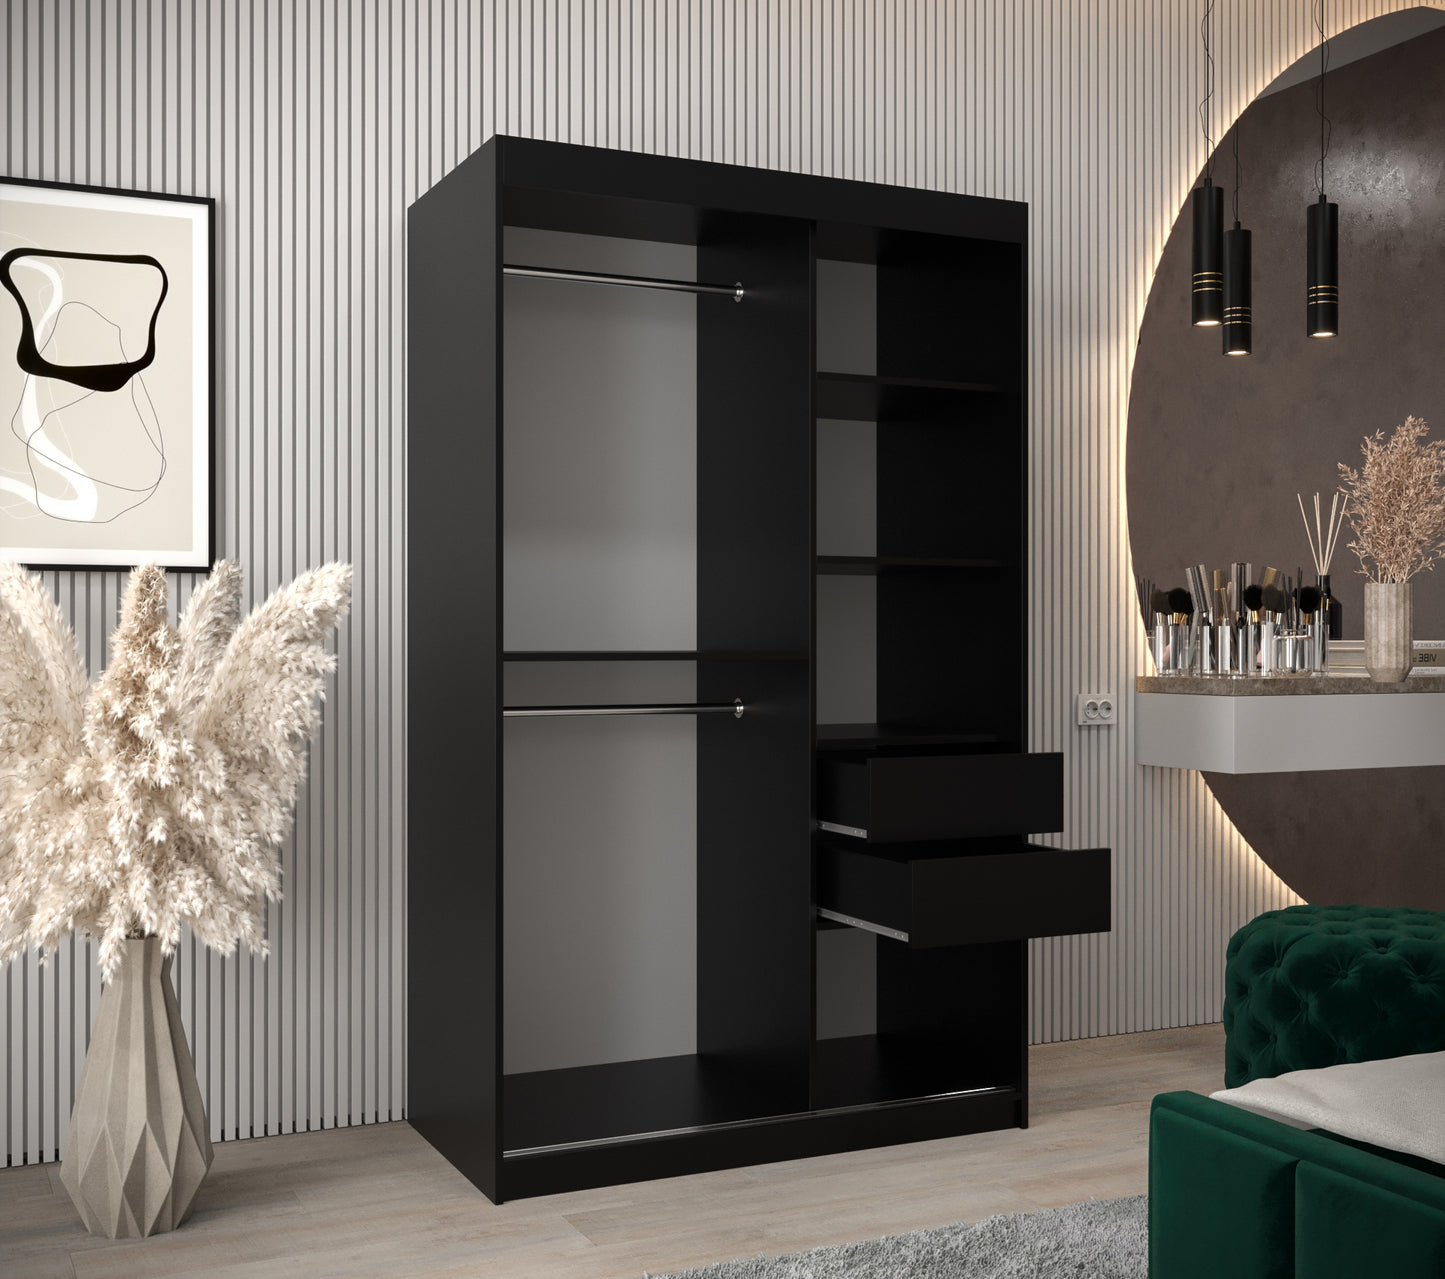 LOUVRE - Wardrobe with 2 Sliding Doors Black or White with Shelves, Rails, Drawers and LED lights Optional > 120cm <